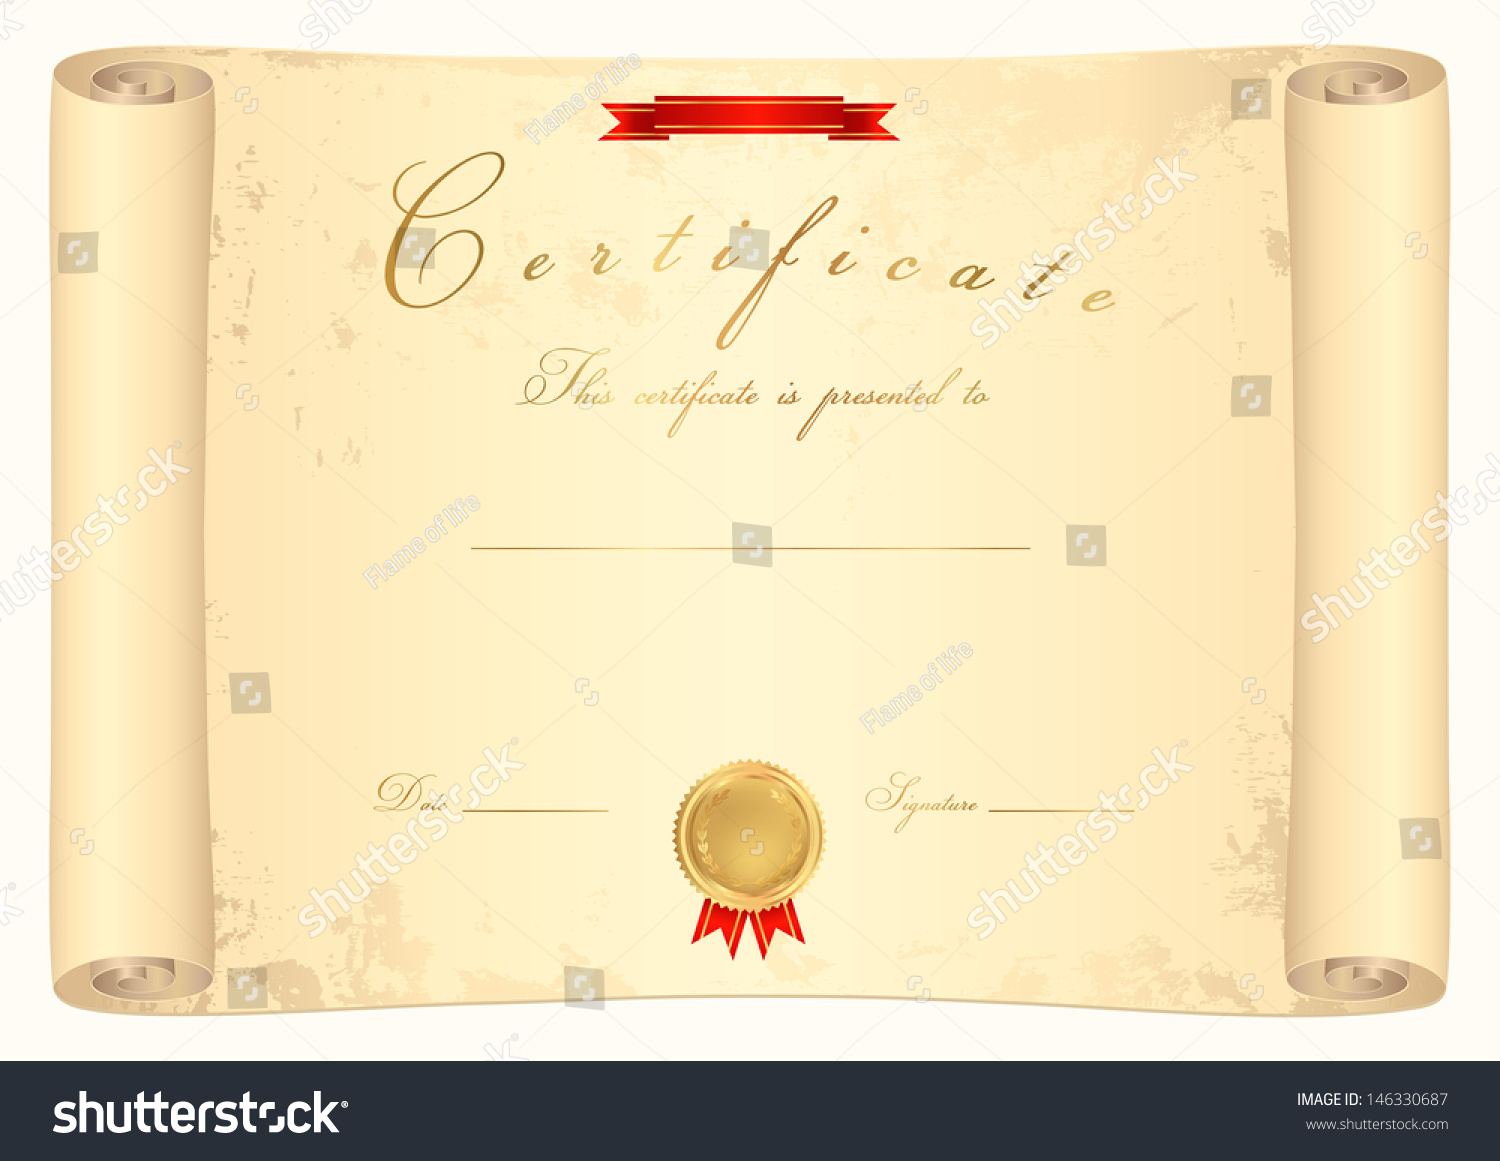 Scroll Certificate Completion Template Sample Background Intended For Certificate Scroll Template